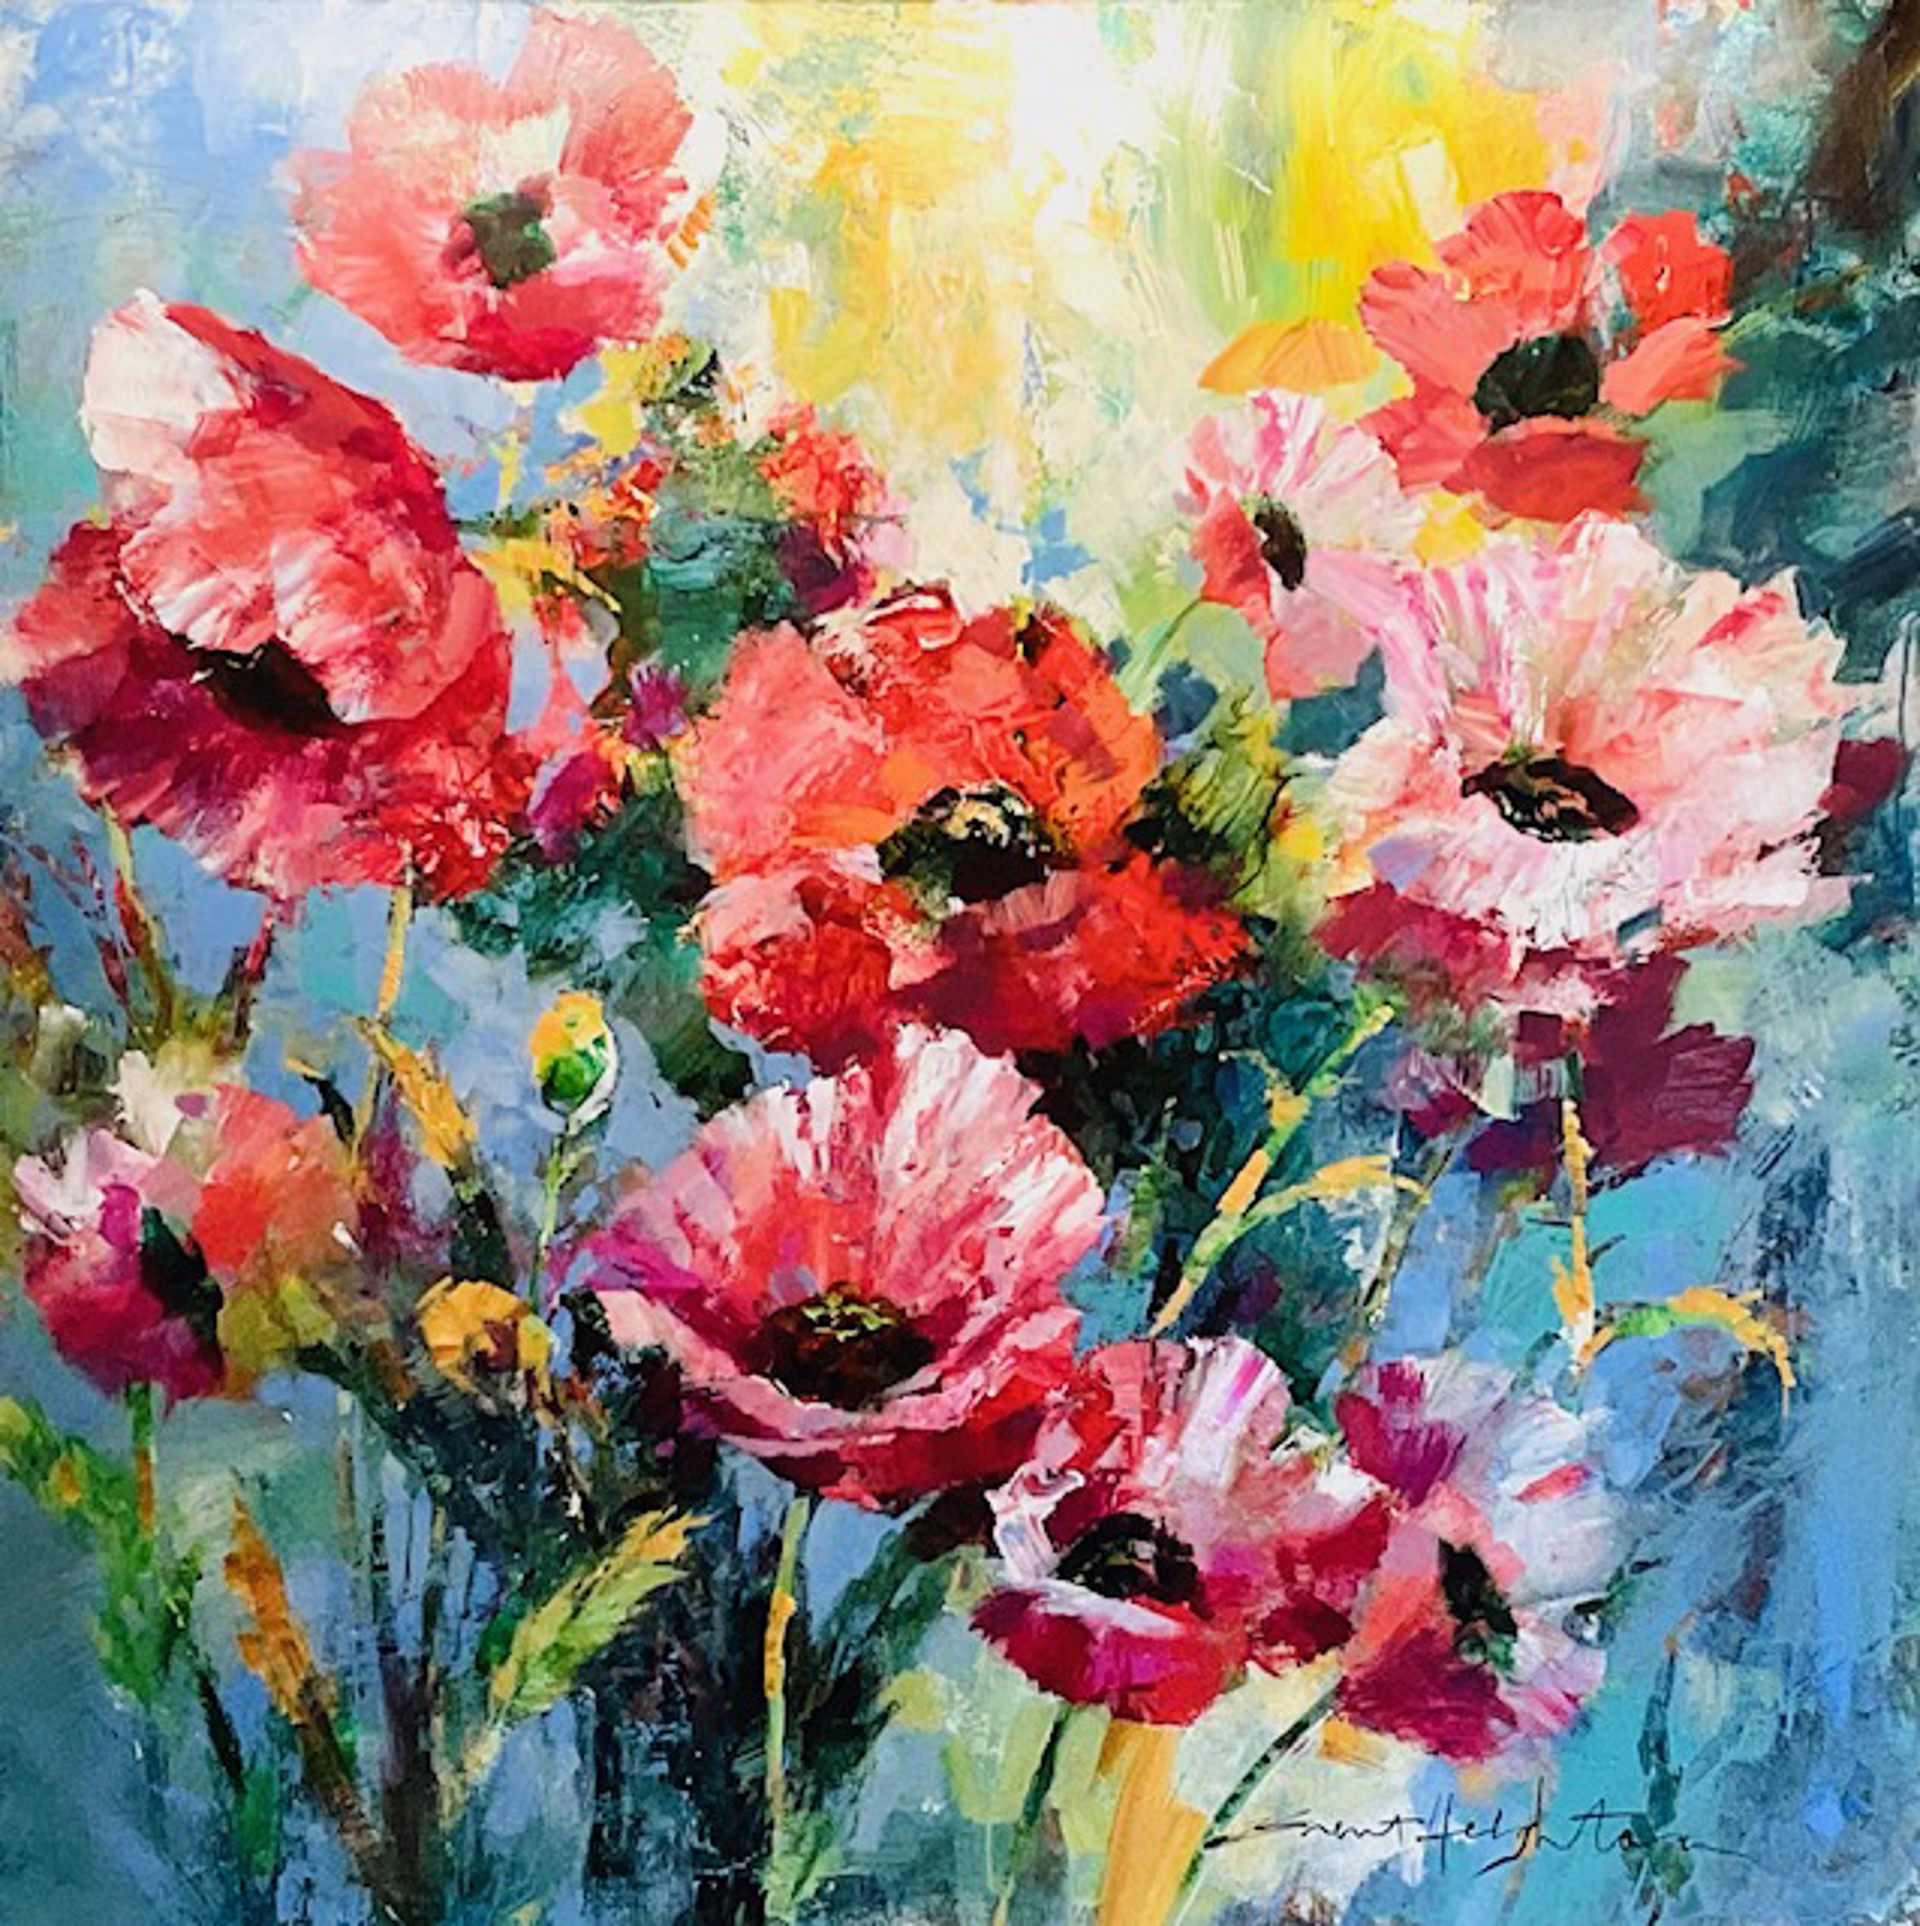 Floral Abstraction by Brent Heighton